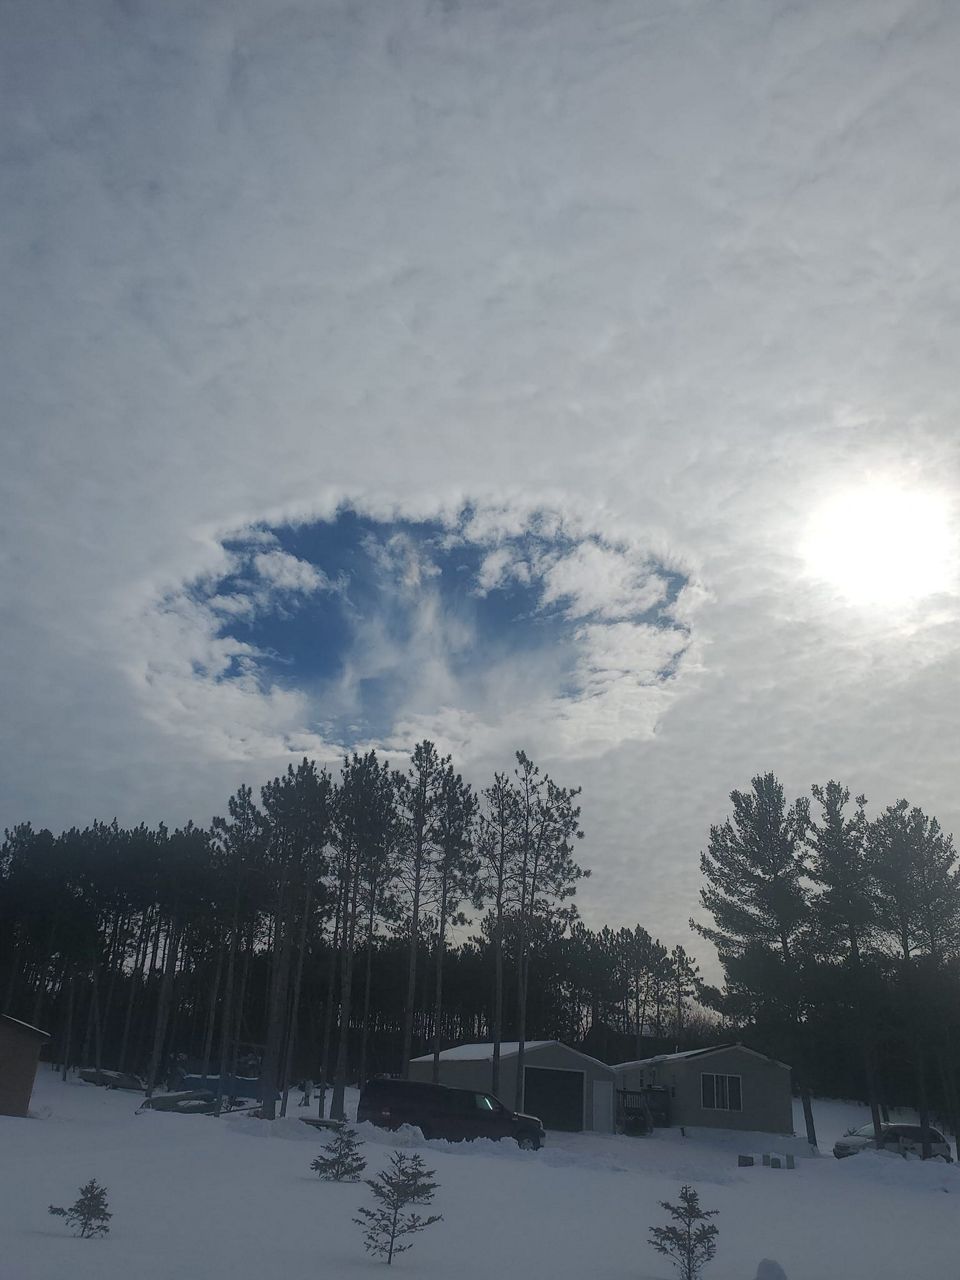 A portal to another galaxy? No, it’s a fallstreak hole